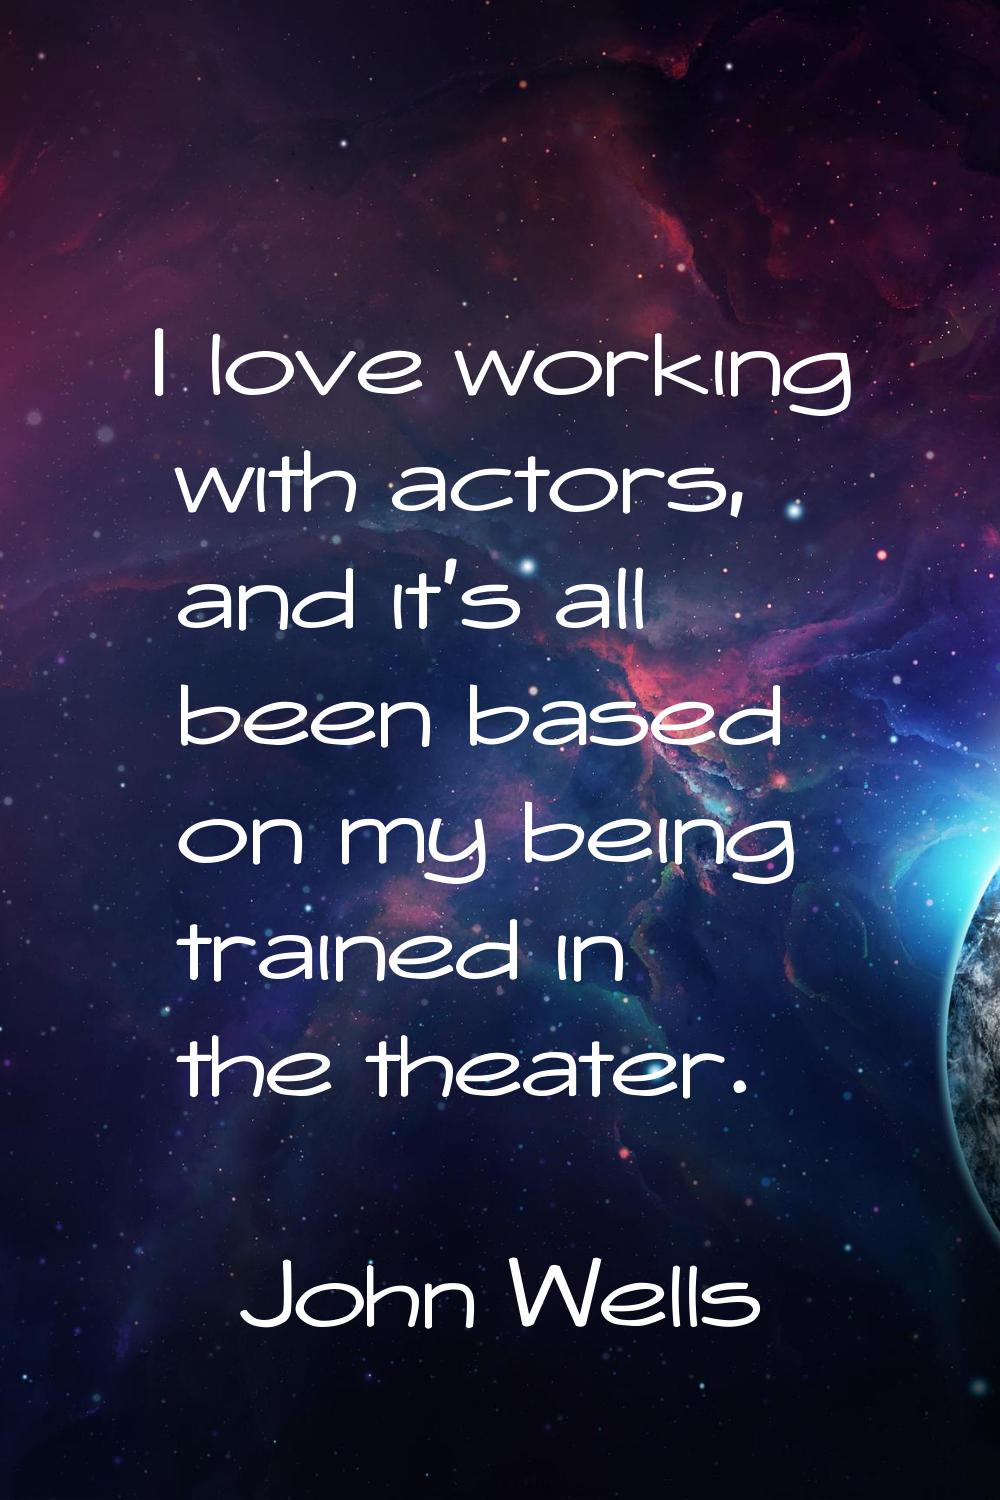 I love working with actors, and it's all been based on my being trained in the theater.